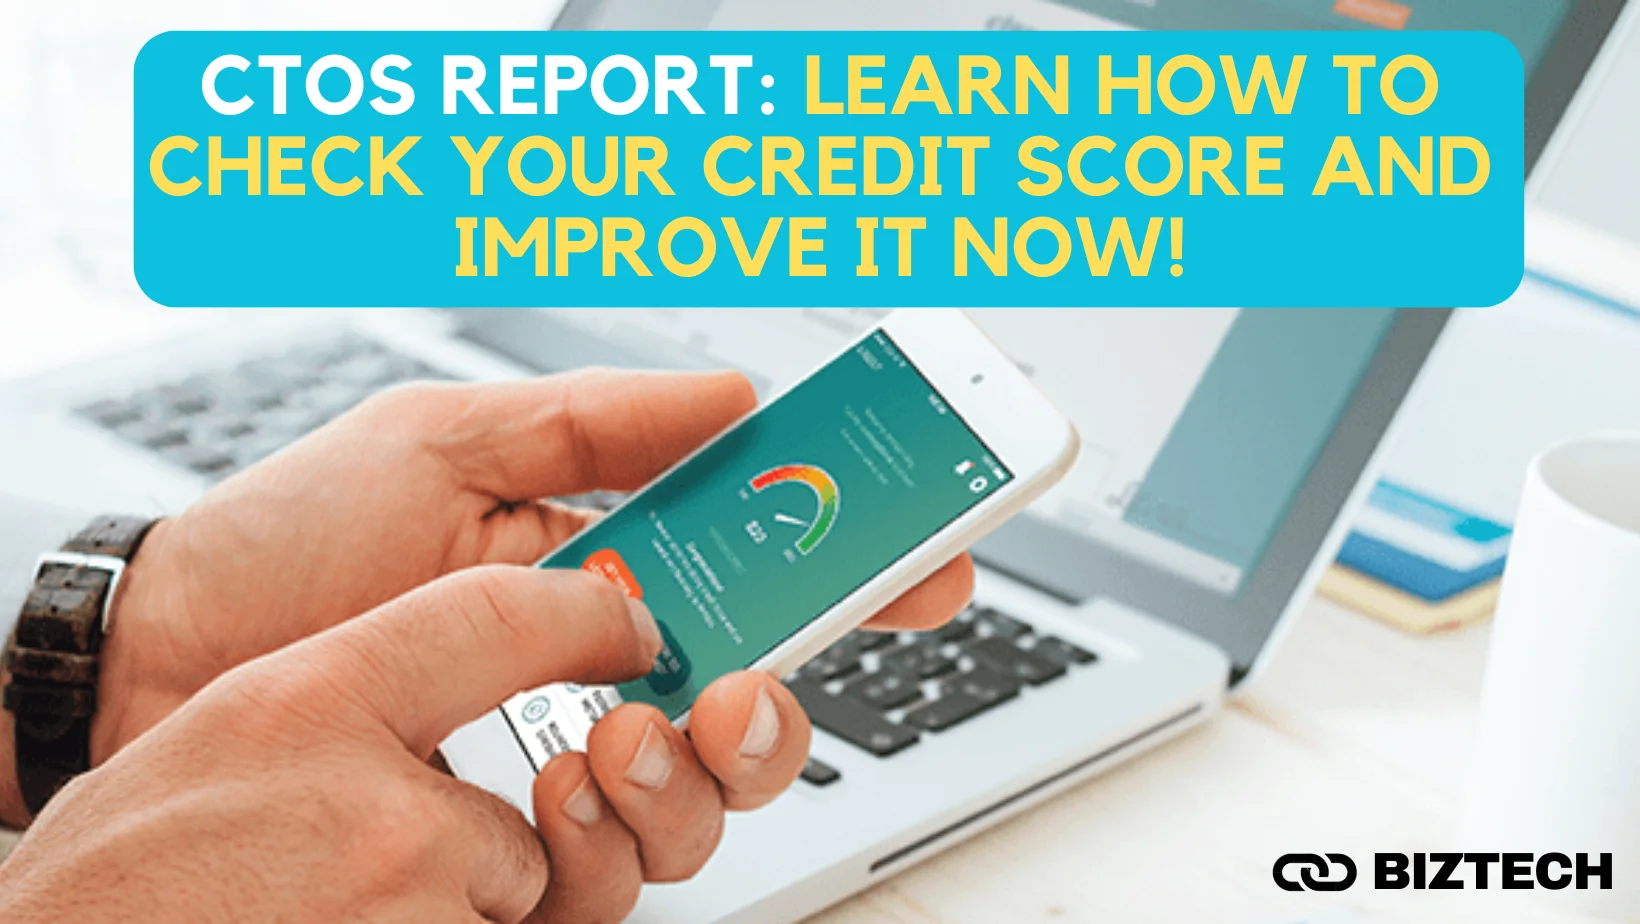 CTOS Report: Learn How to Check Your Credit Score and Improve It Now